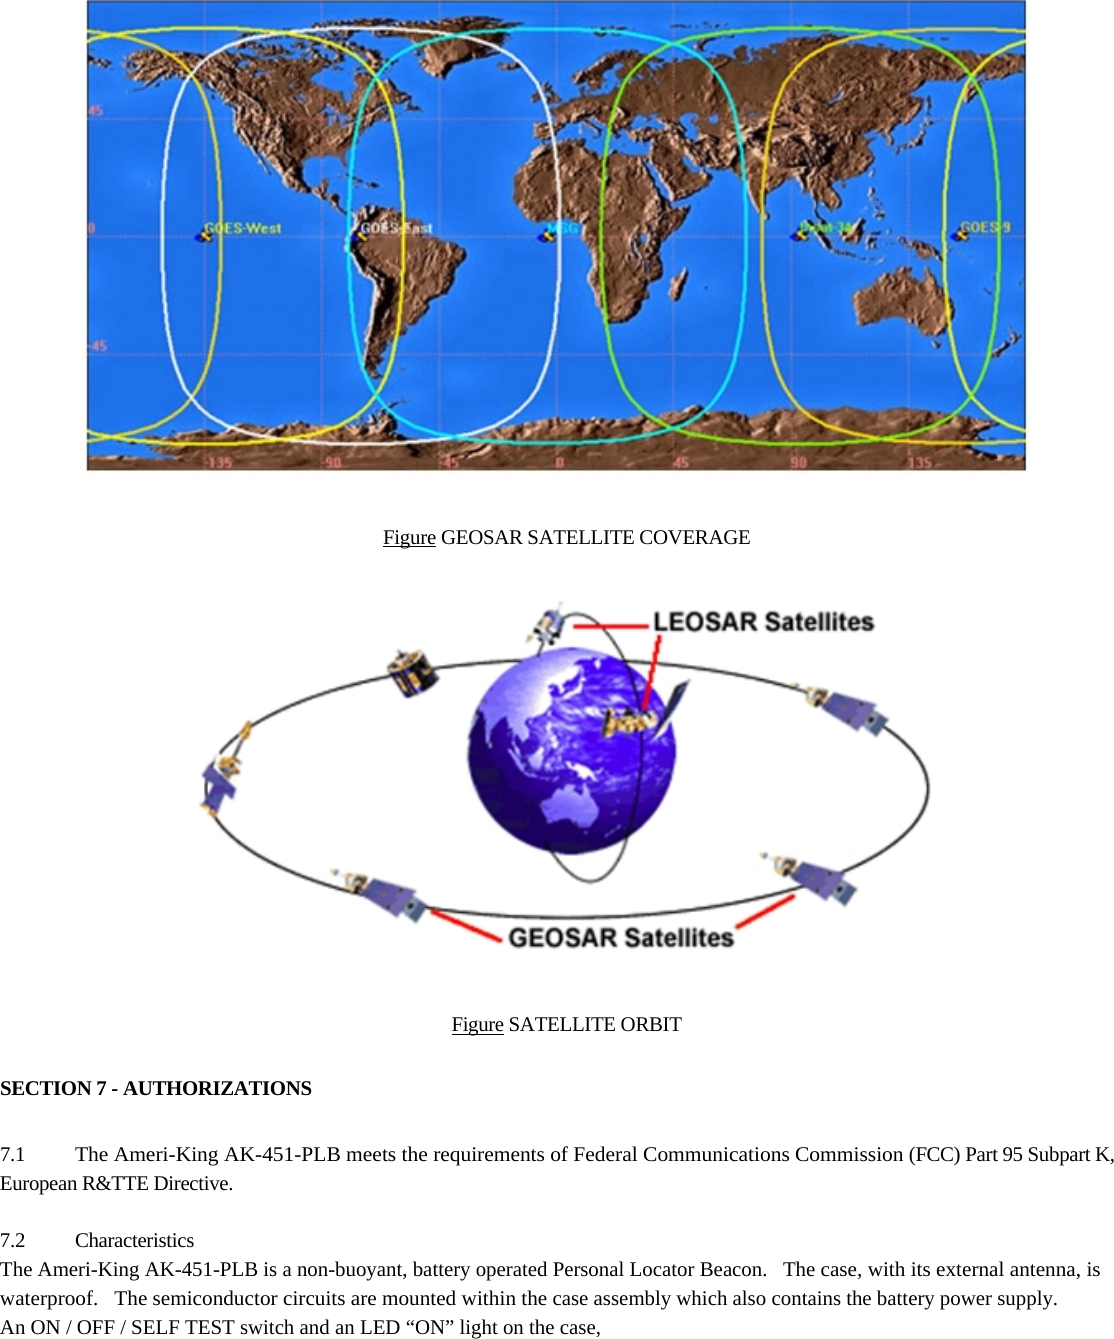  11                          Figure GEOSAR SATELLITE COVERAGE                    Figure SATELLITE ORBIT  SECTION 7 - AUTHORIZATIONS  7.1 The Ameri-King AK-451-PLB meets the requirements of Federal Communications Commission (FCC) Part 95 Subpart K, European R&amp;TTE Directive.  7.2 Characteristics The Ameri-King AK-451-PLB is a non-buoyant, battery operated Personal Locator Beacon.   The case, with its external antenna, is waterproof.   The semiconductor circuits are mounted within the case assembly which also contains the battery power supply.  An ON / OFF / SELF TEST switch and an LED “ON” light on the case,  